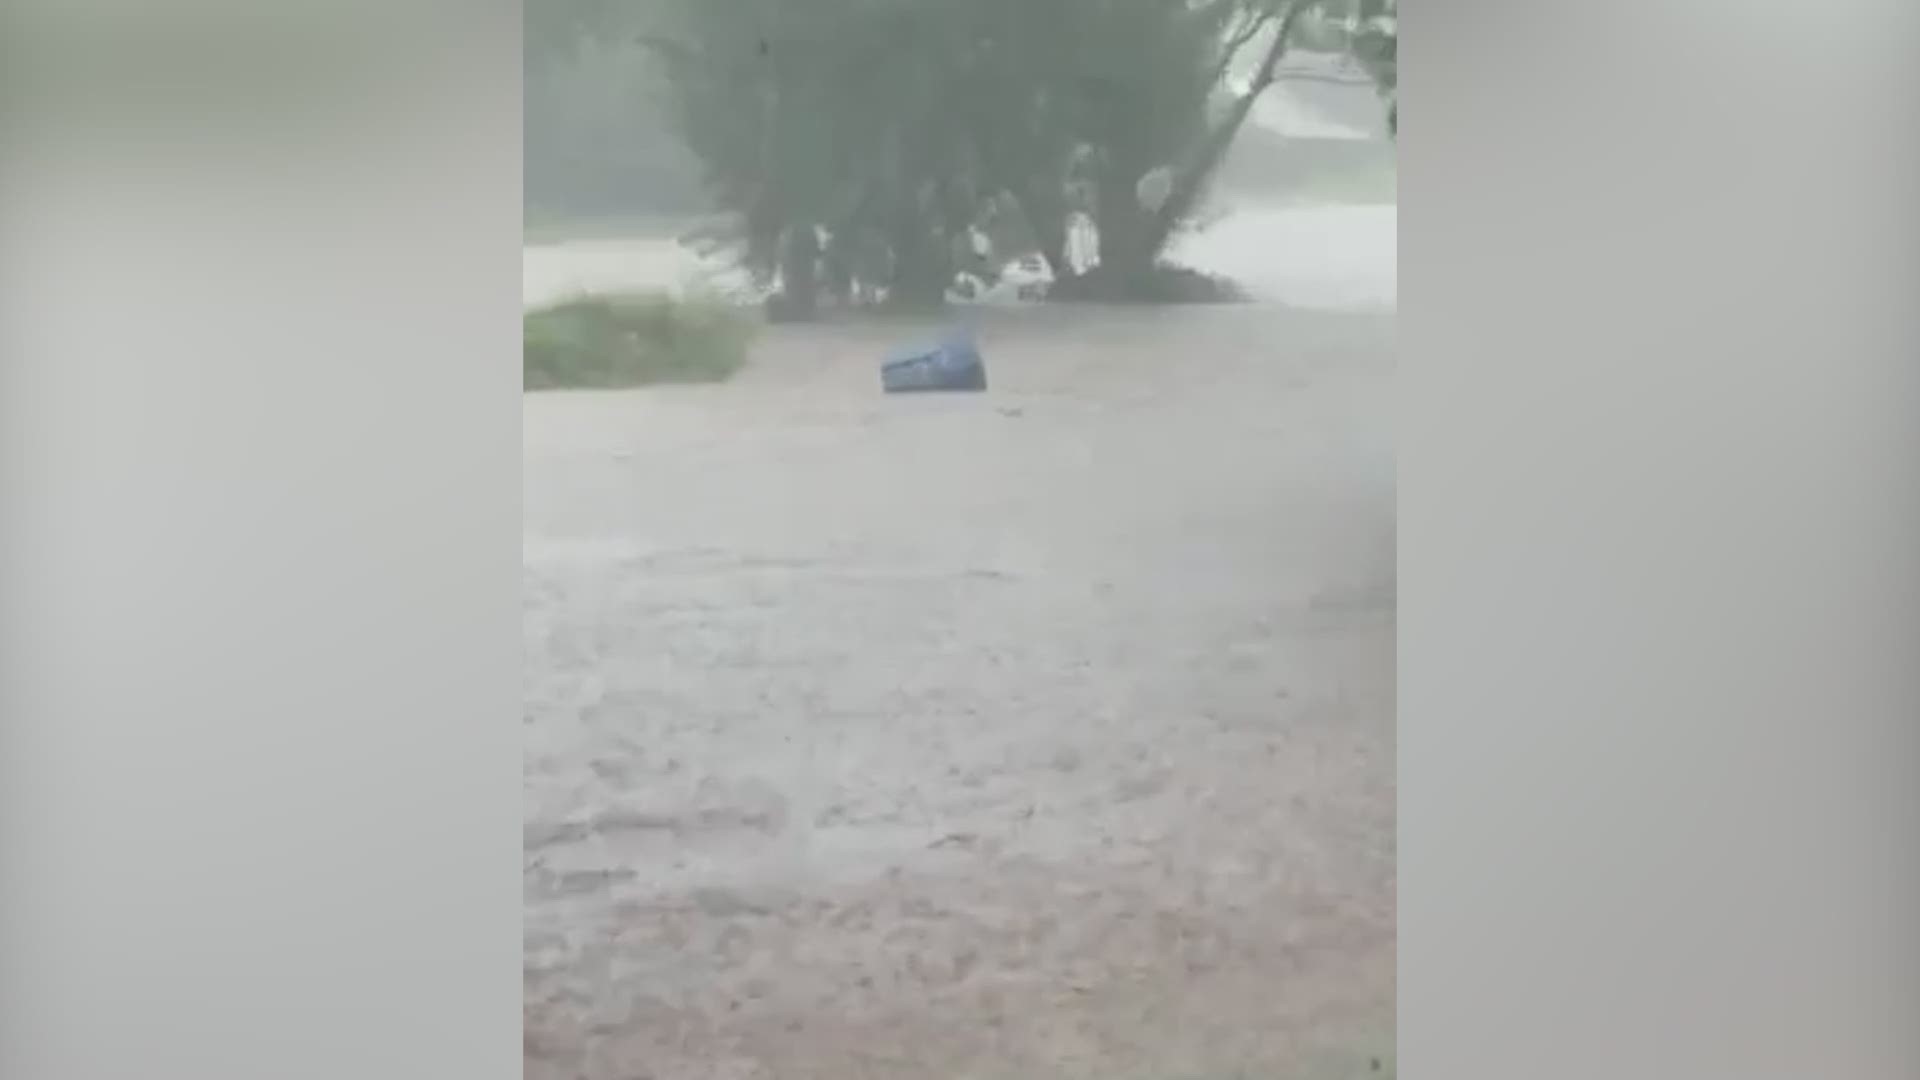 The rain came so fast and so strong Tuesday morning that a trash can was seen floating through a San Antonio neighborhood.